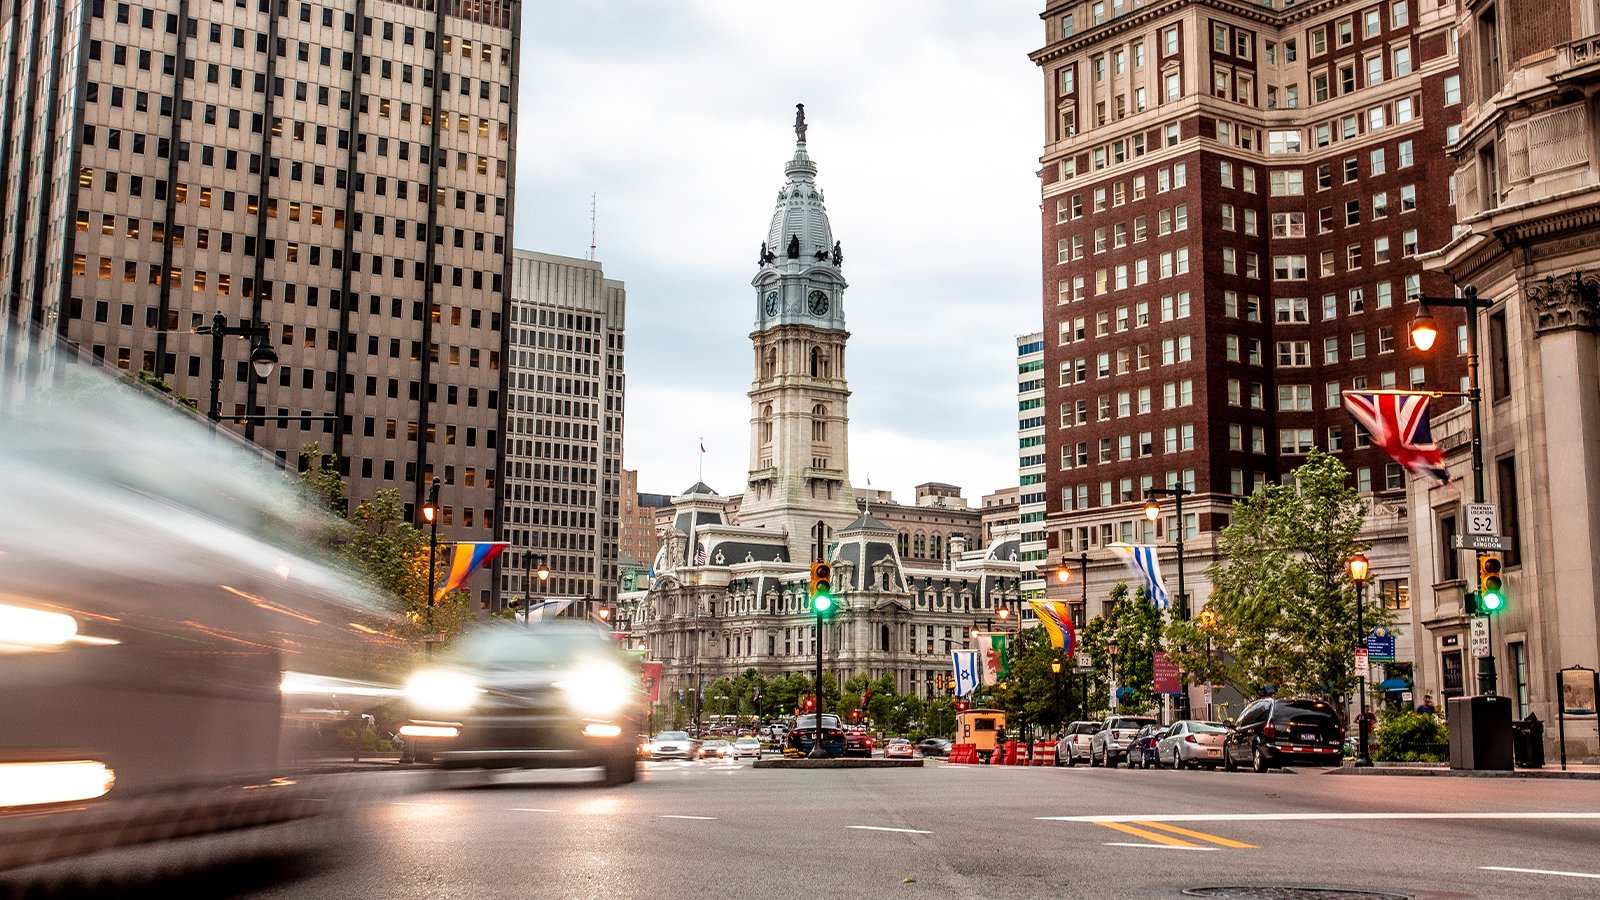 A street level view of Philadelphia with City Hall in the background.